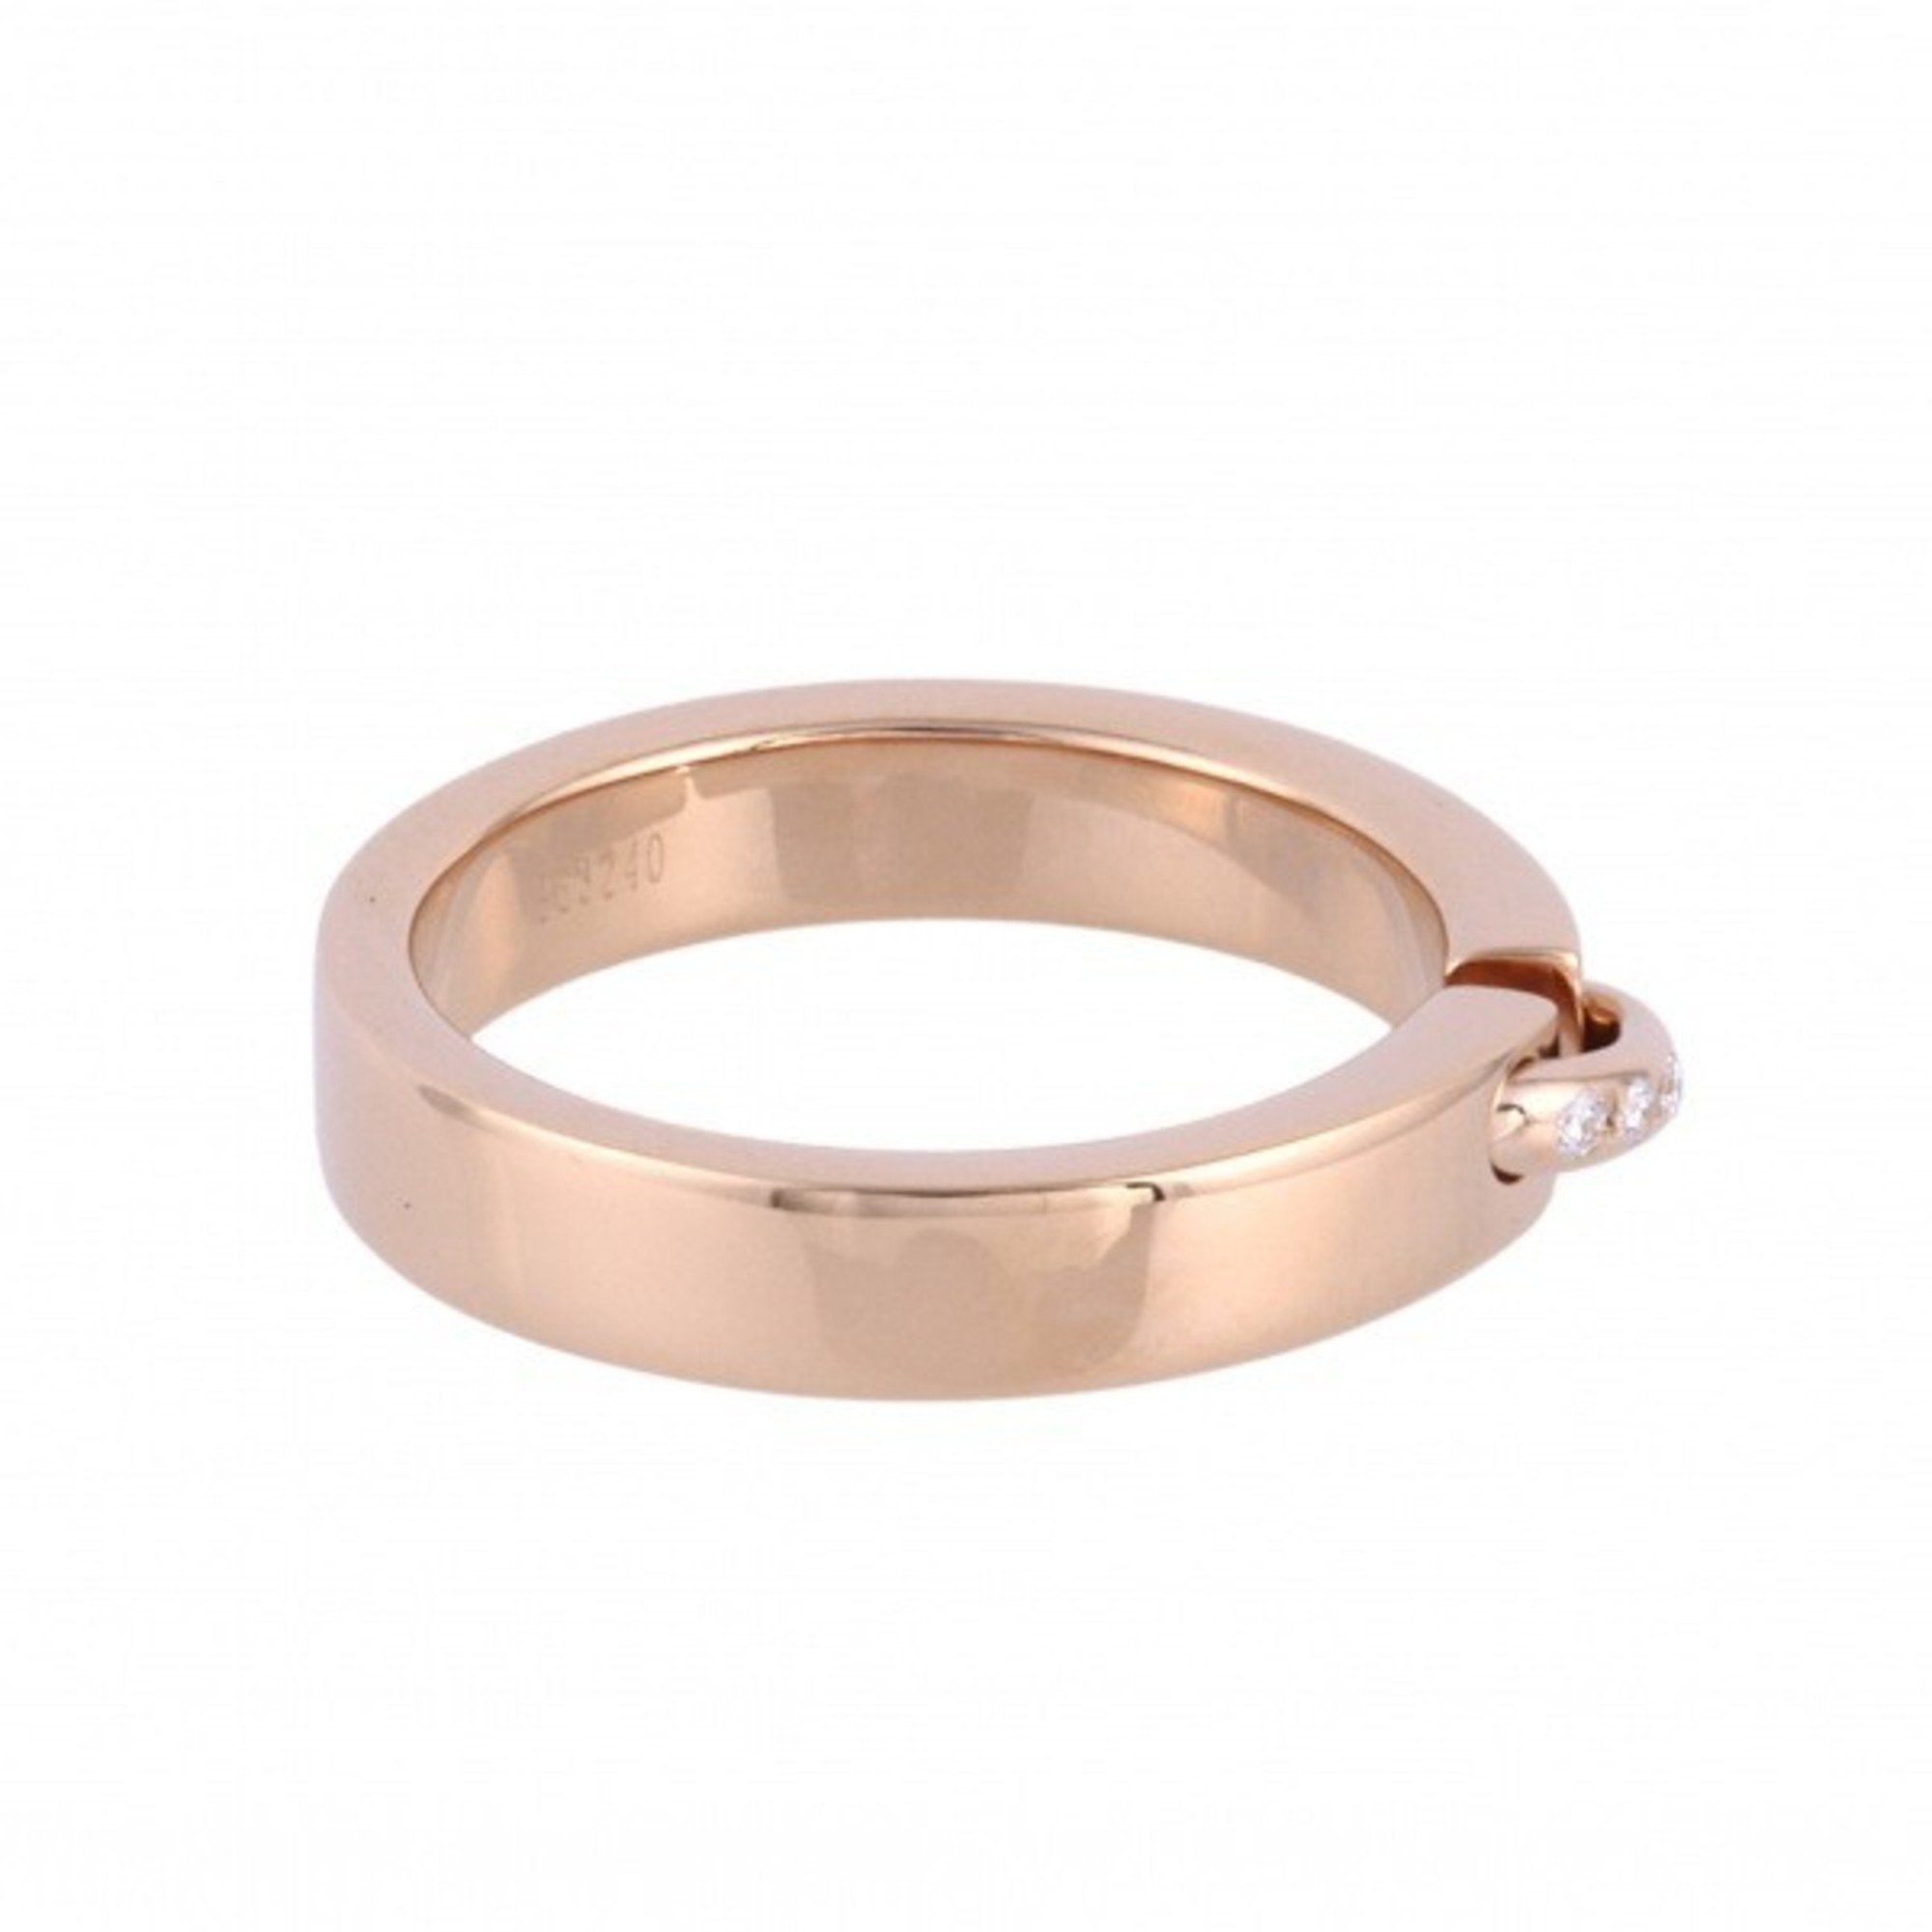 Chaumet Lien Evidence Ring K18PG Pink Gold